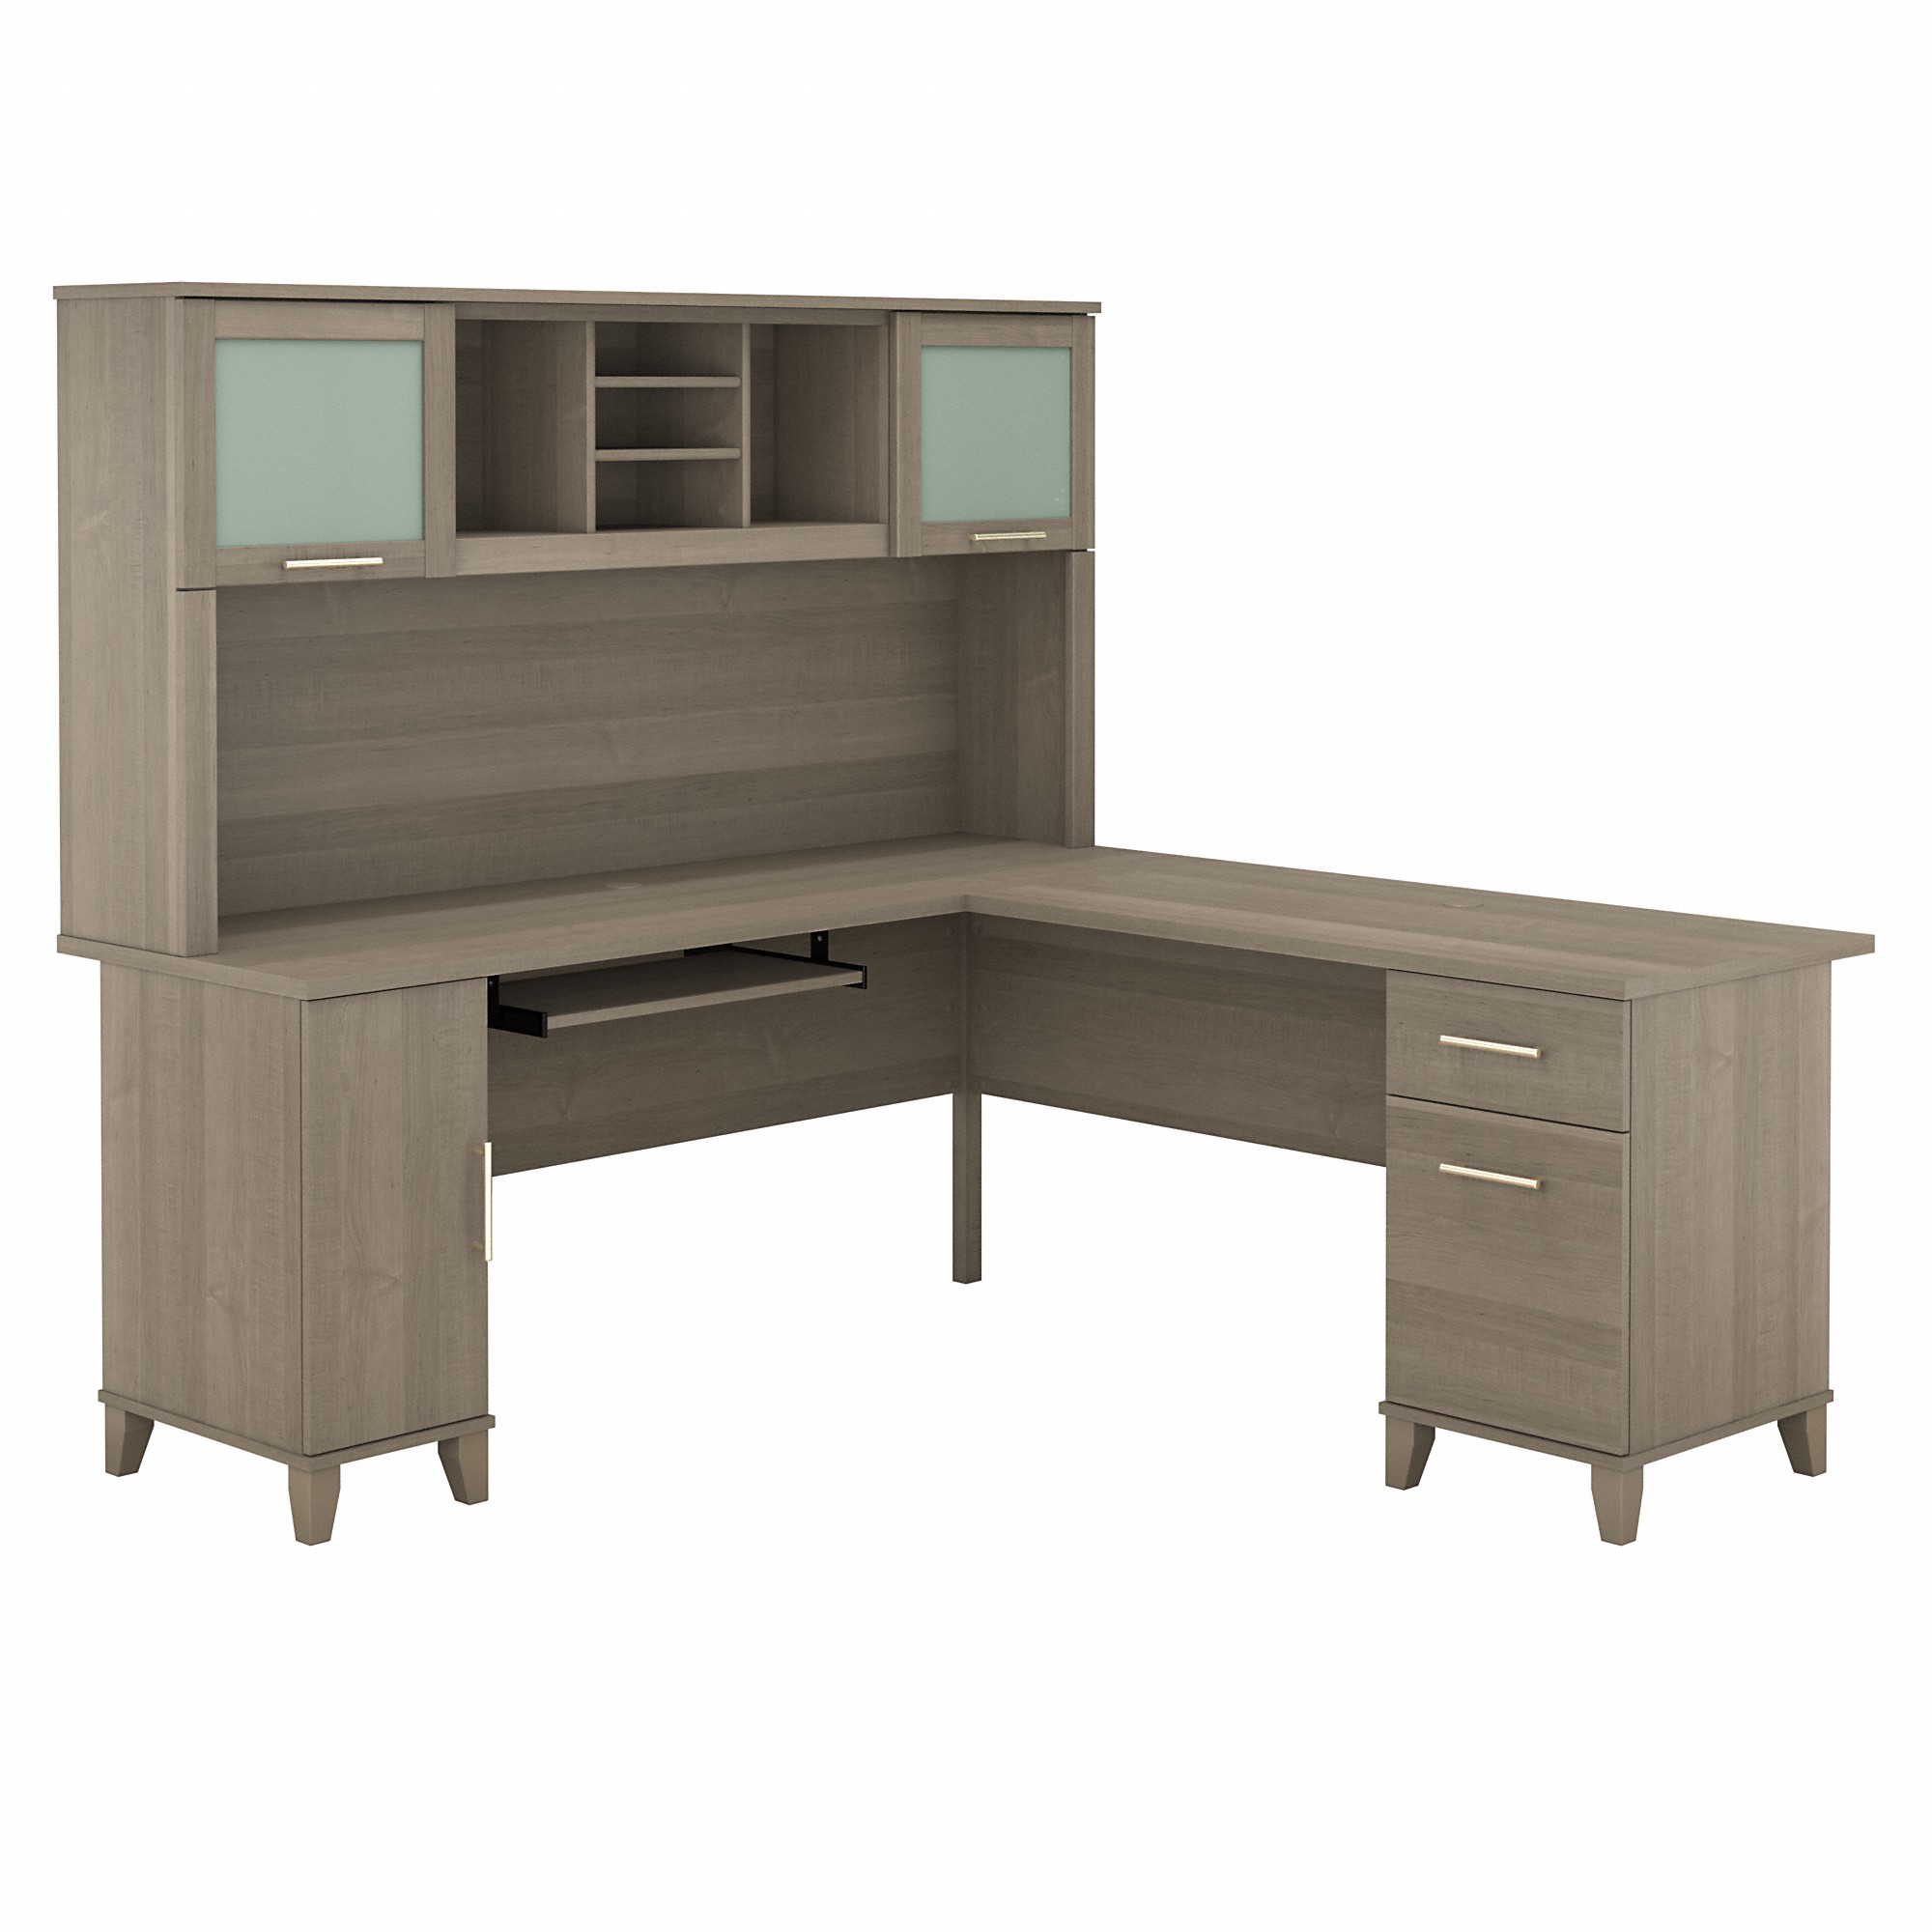 Bush Furniture Somerset 72" L Desk and Hutch with Storage, Ash Gray - image 1 of 5